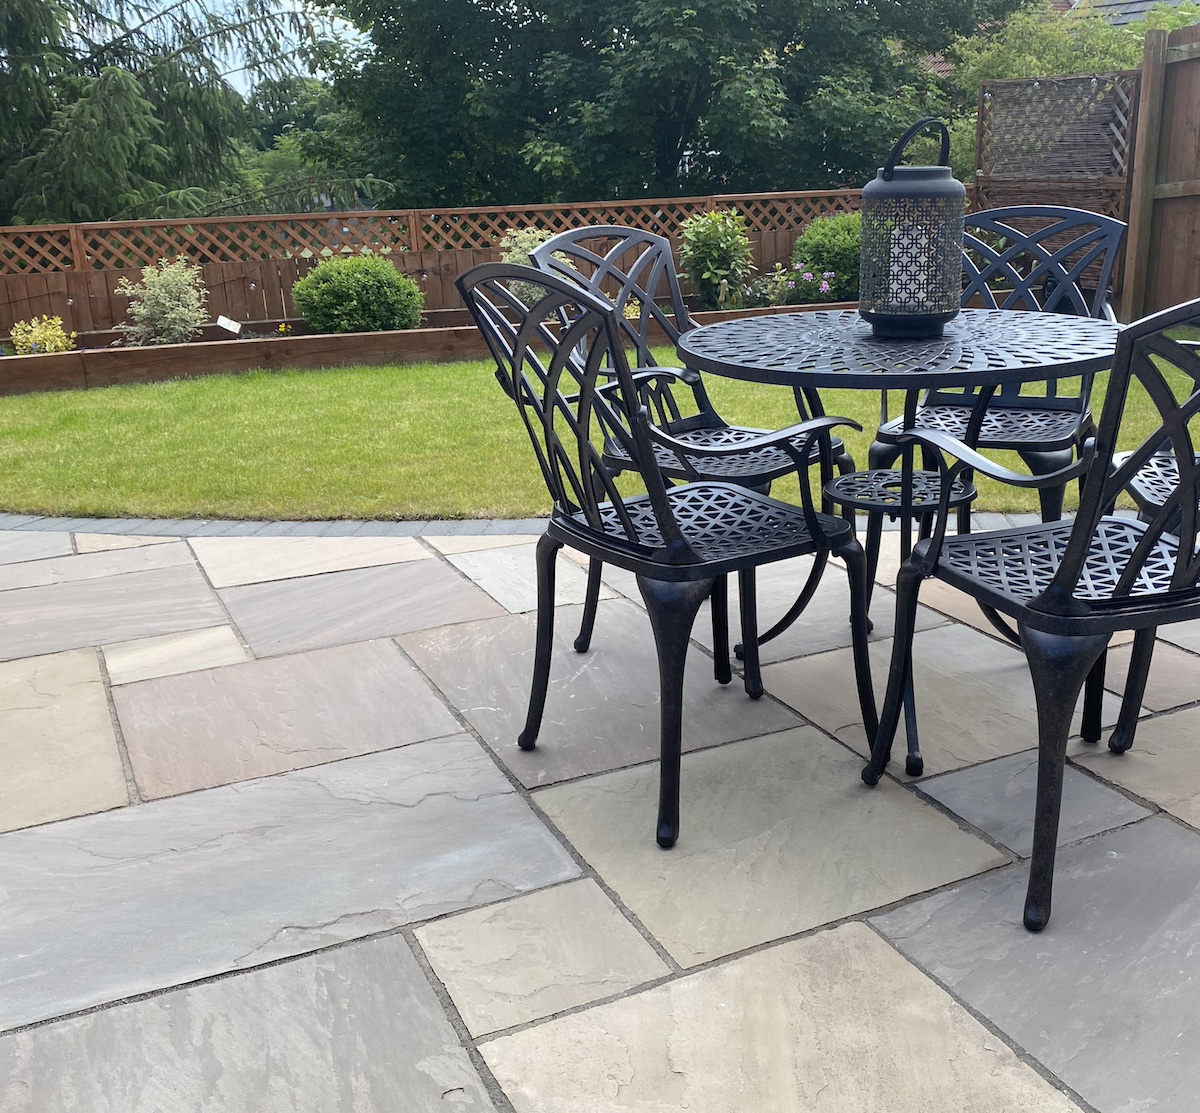 How to shop for new black garden furniture